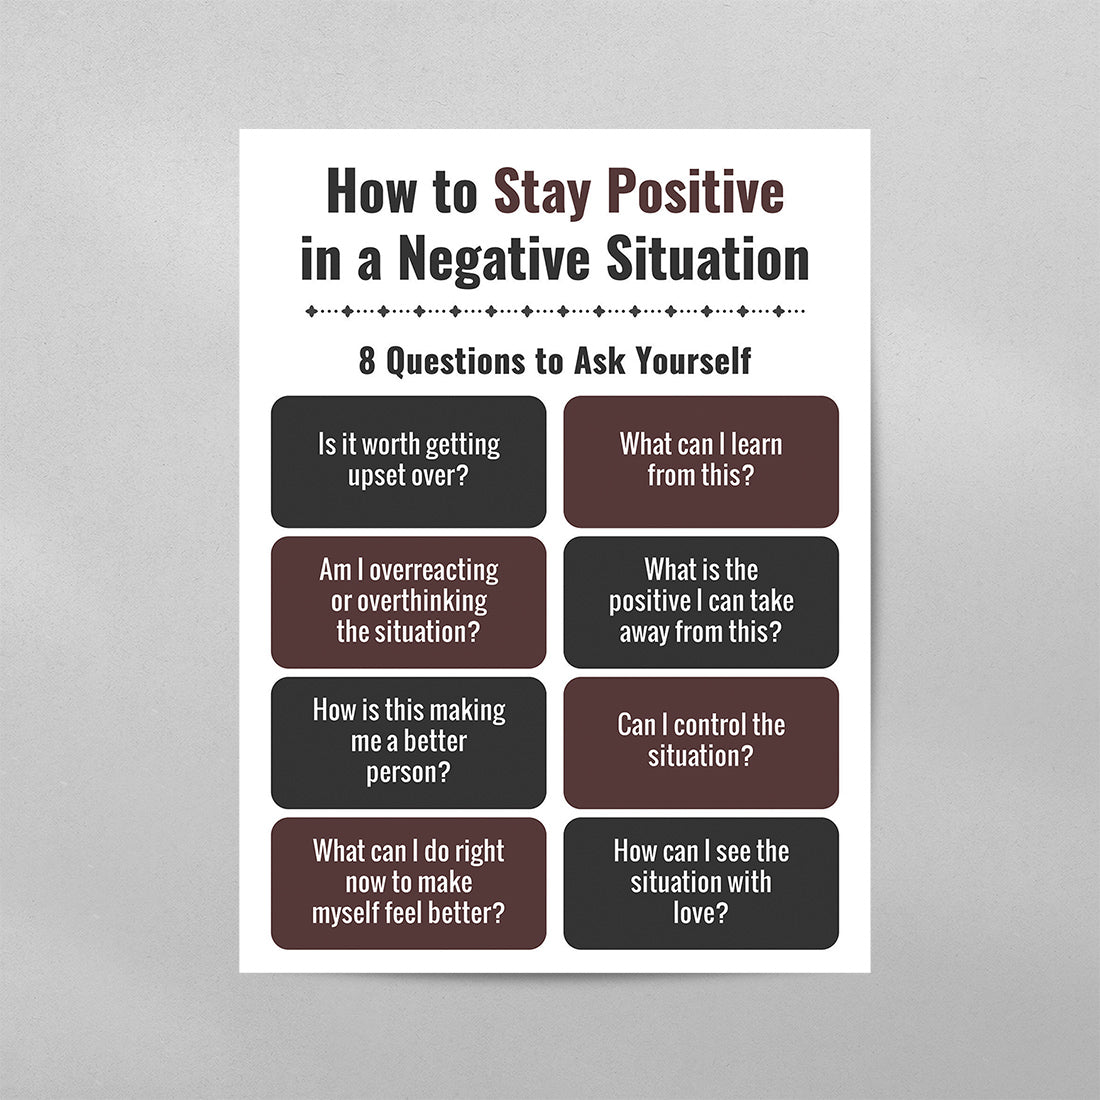 How To Stay Positive In a Negative Situation